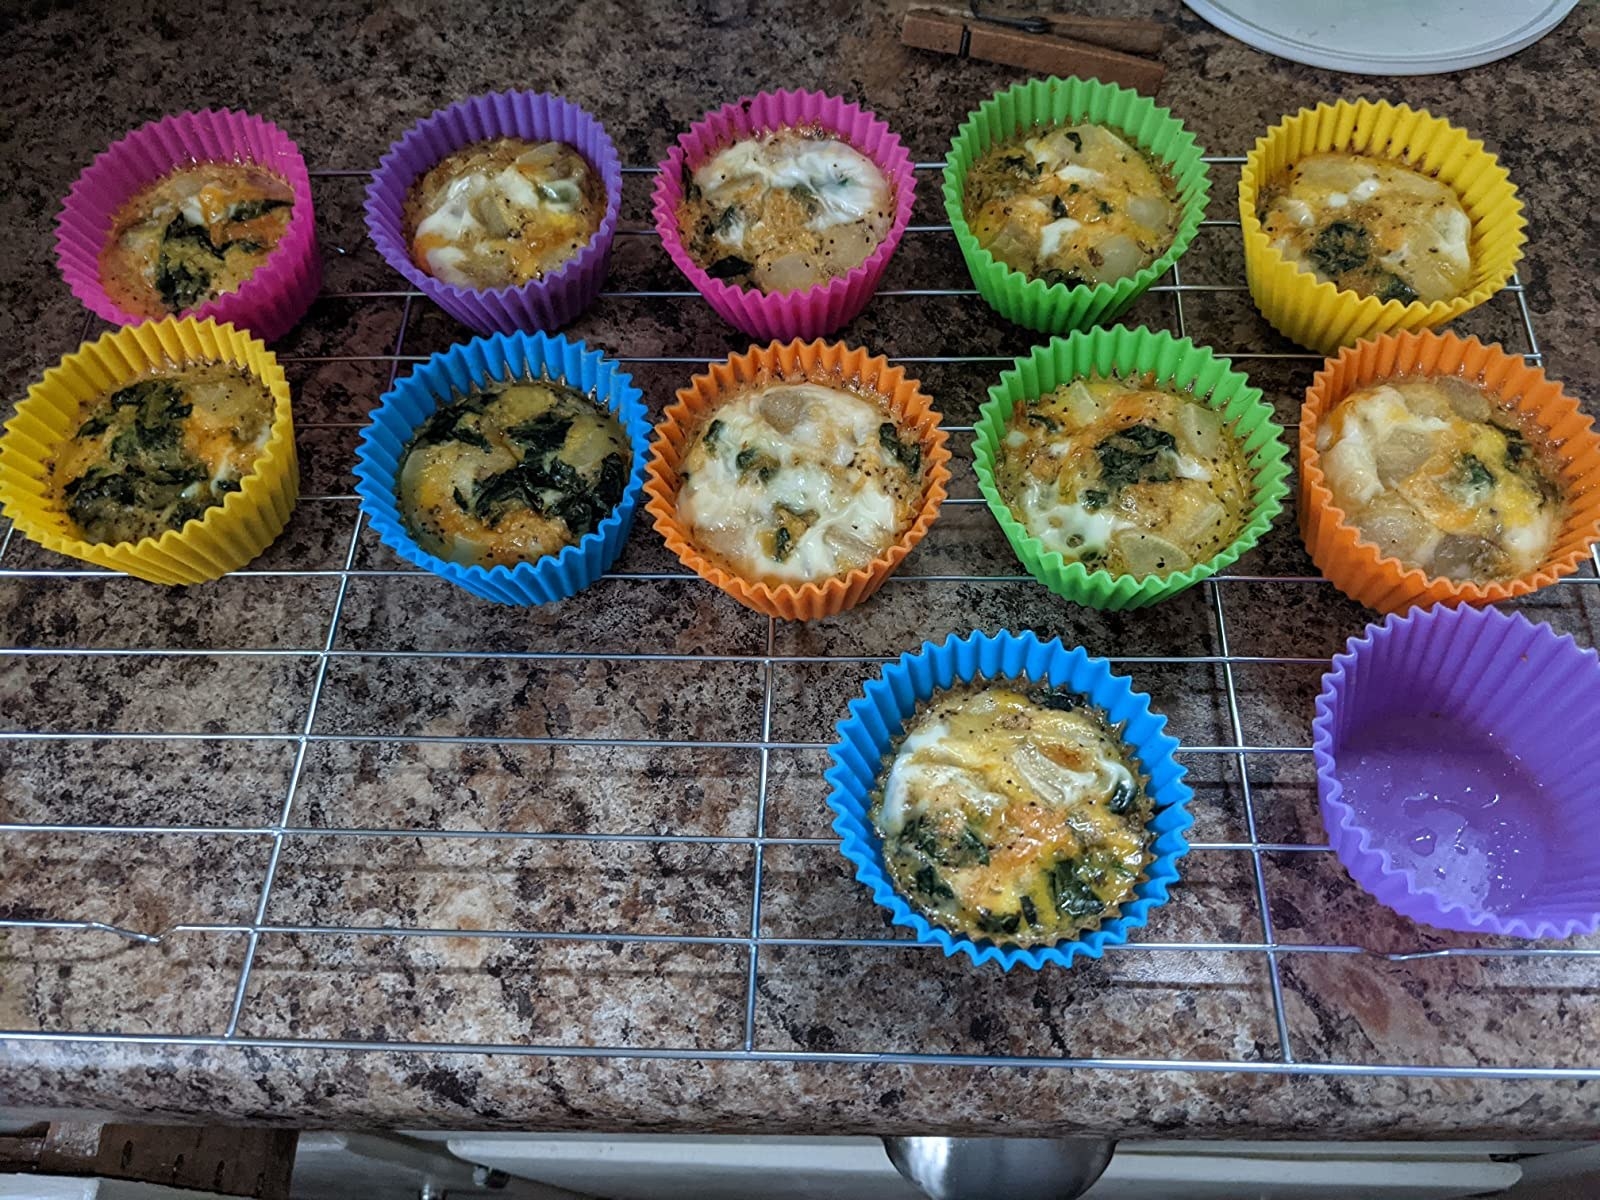 the pink, purple, blue, yellow, and orange silicone baking cups with muffins in them